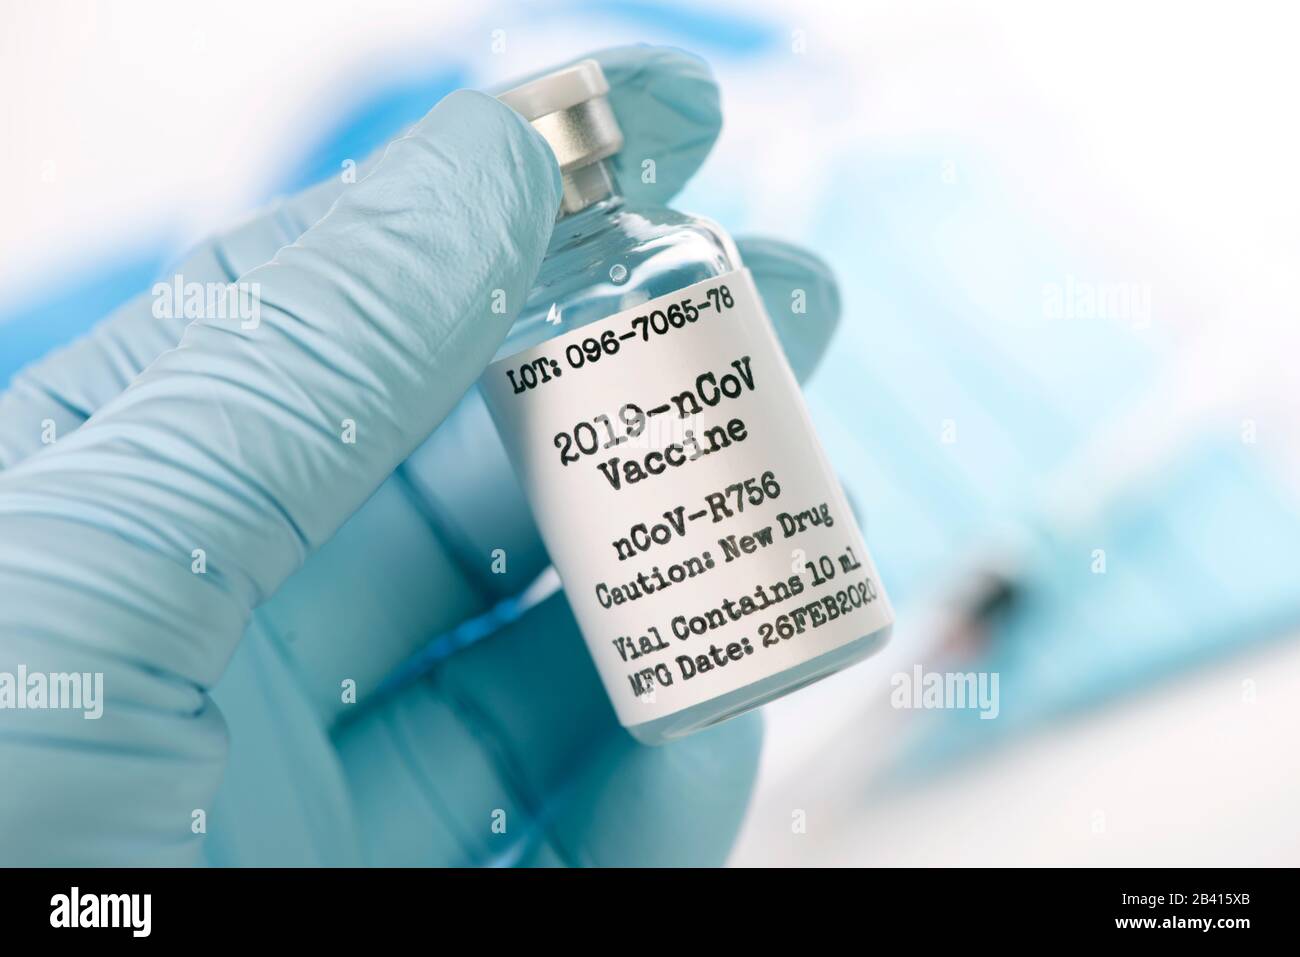 Corona virus 2019-nCoV vaccine vial in gloved hand of nurse with syringe and mask. Stock Photo